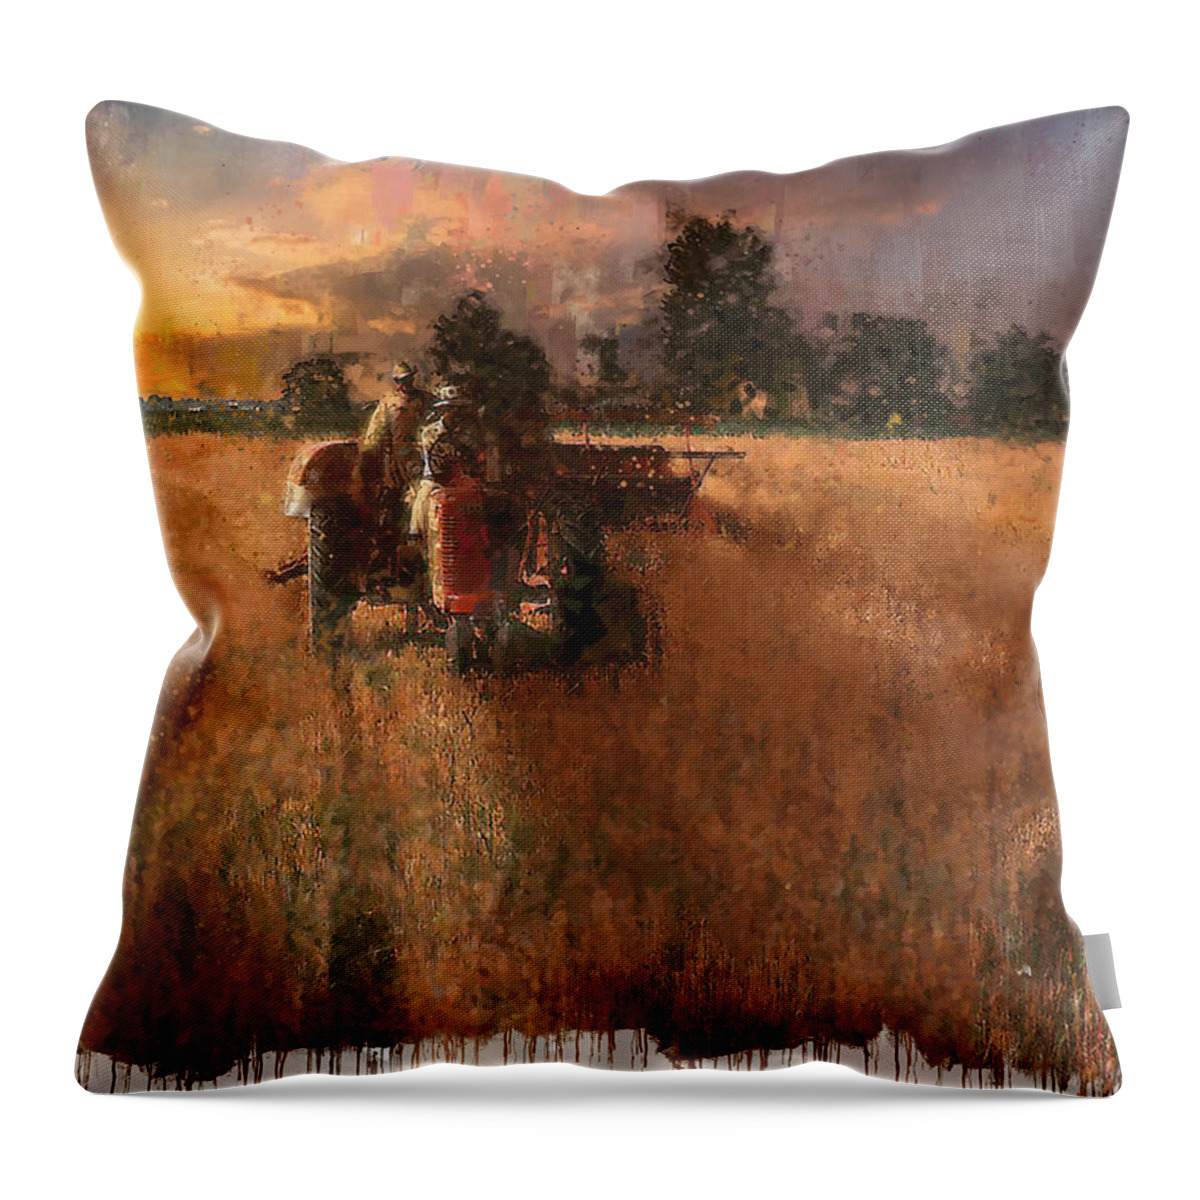 Sunset Throw Pillow featuring the painting Oat Harvest at Sunset - 1940s by Glenn Galen